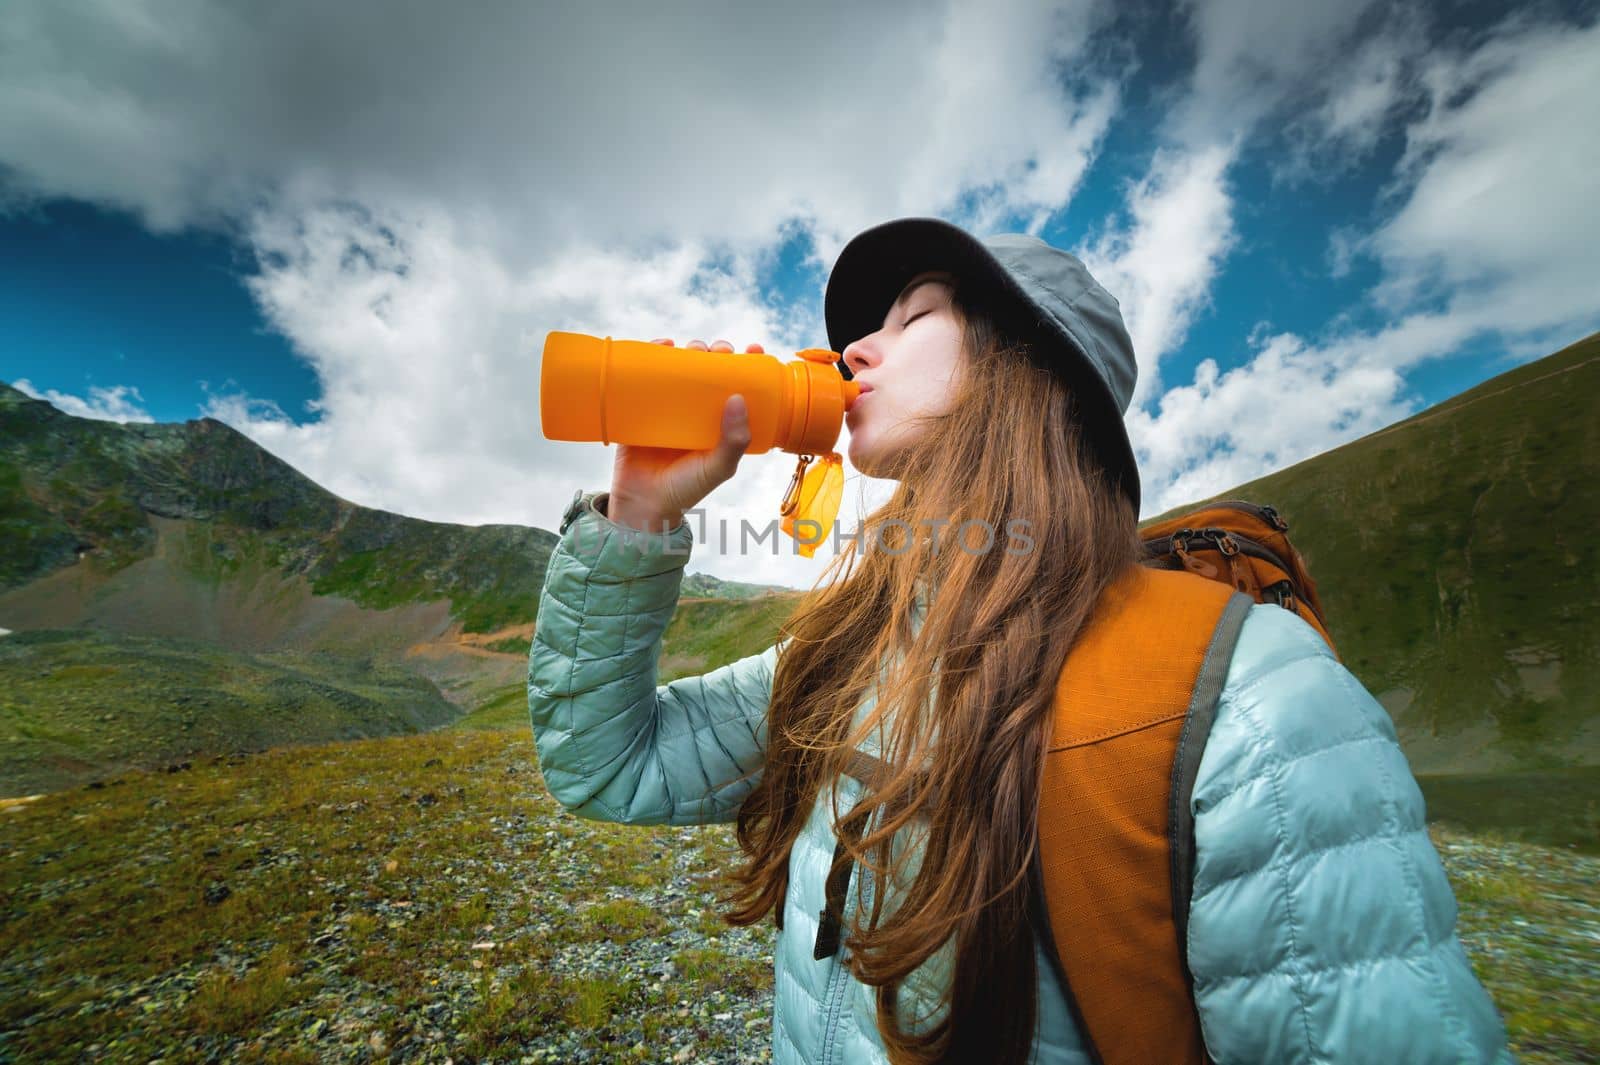 Profile photo of a young beautiful woman with long blond hair, dressed in a silver jacket, drinking from a yellow camping bottle, in the background a magnificent landscape of mountains and clouds by yanik88